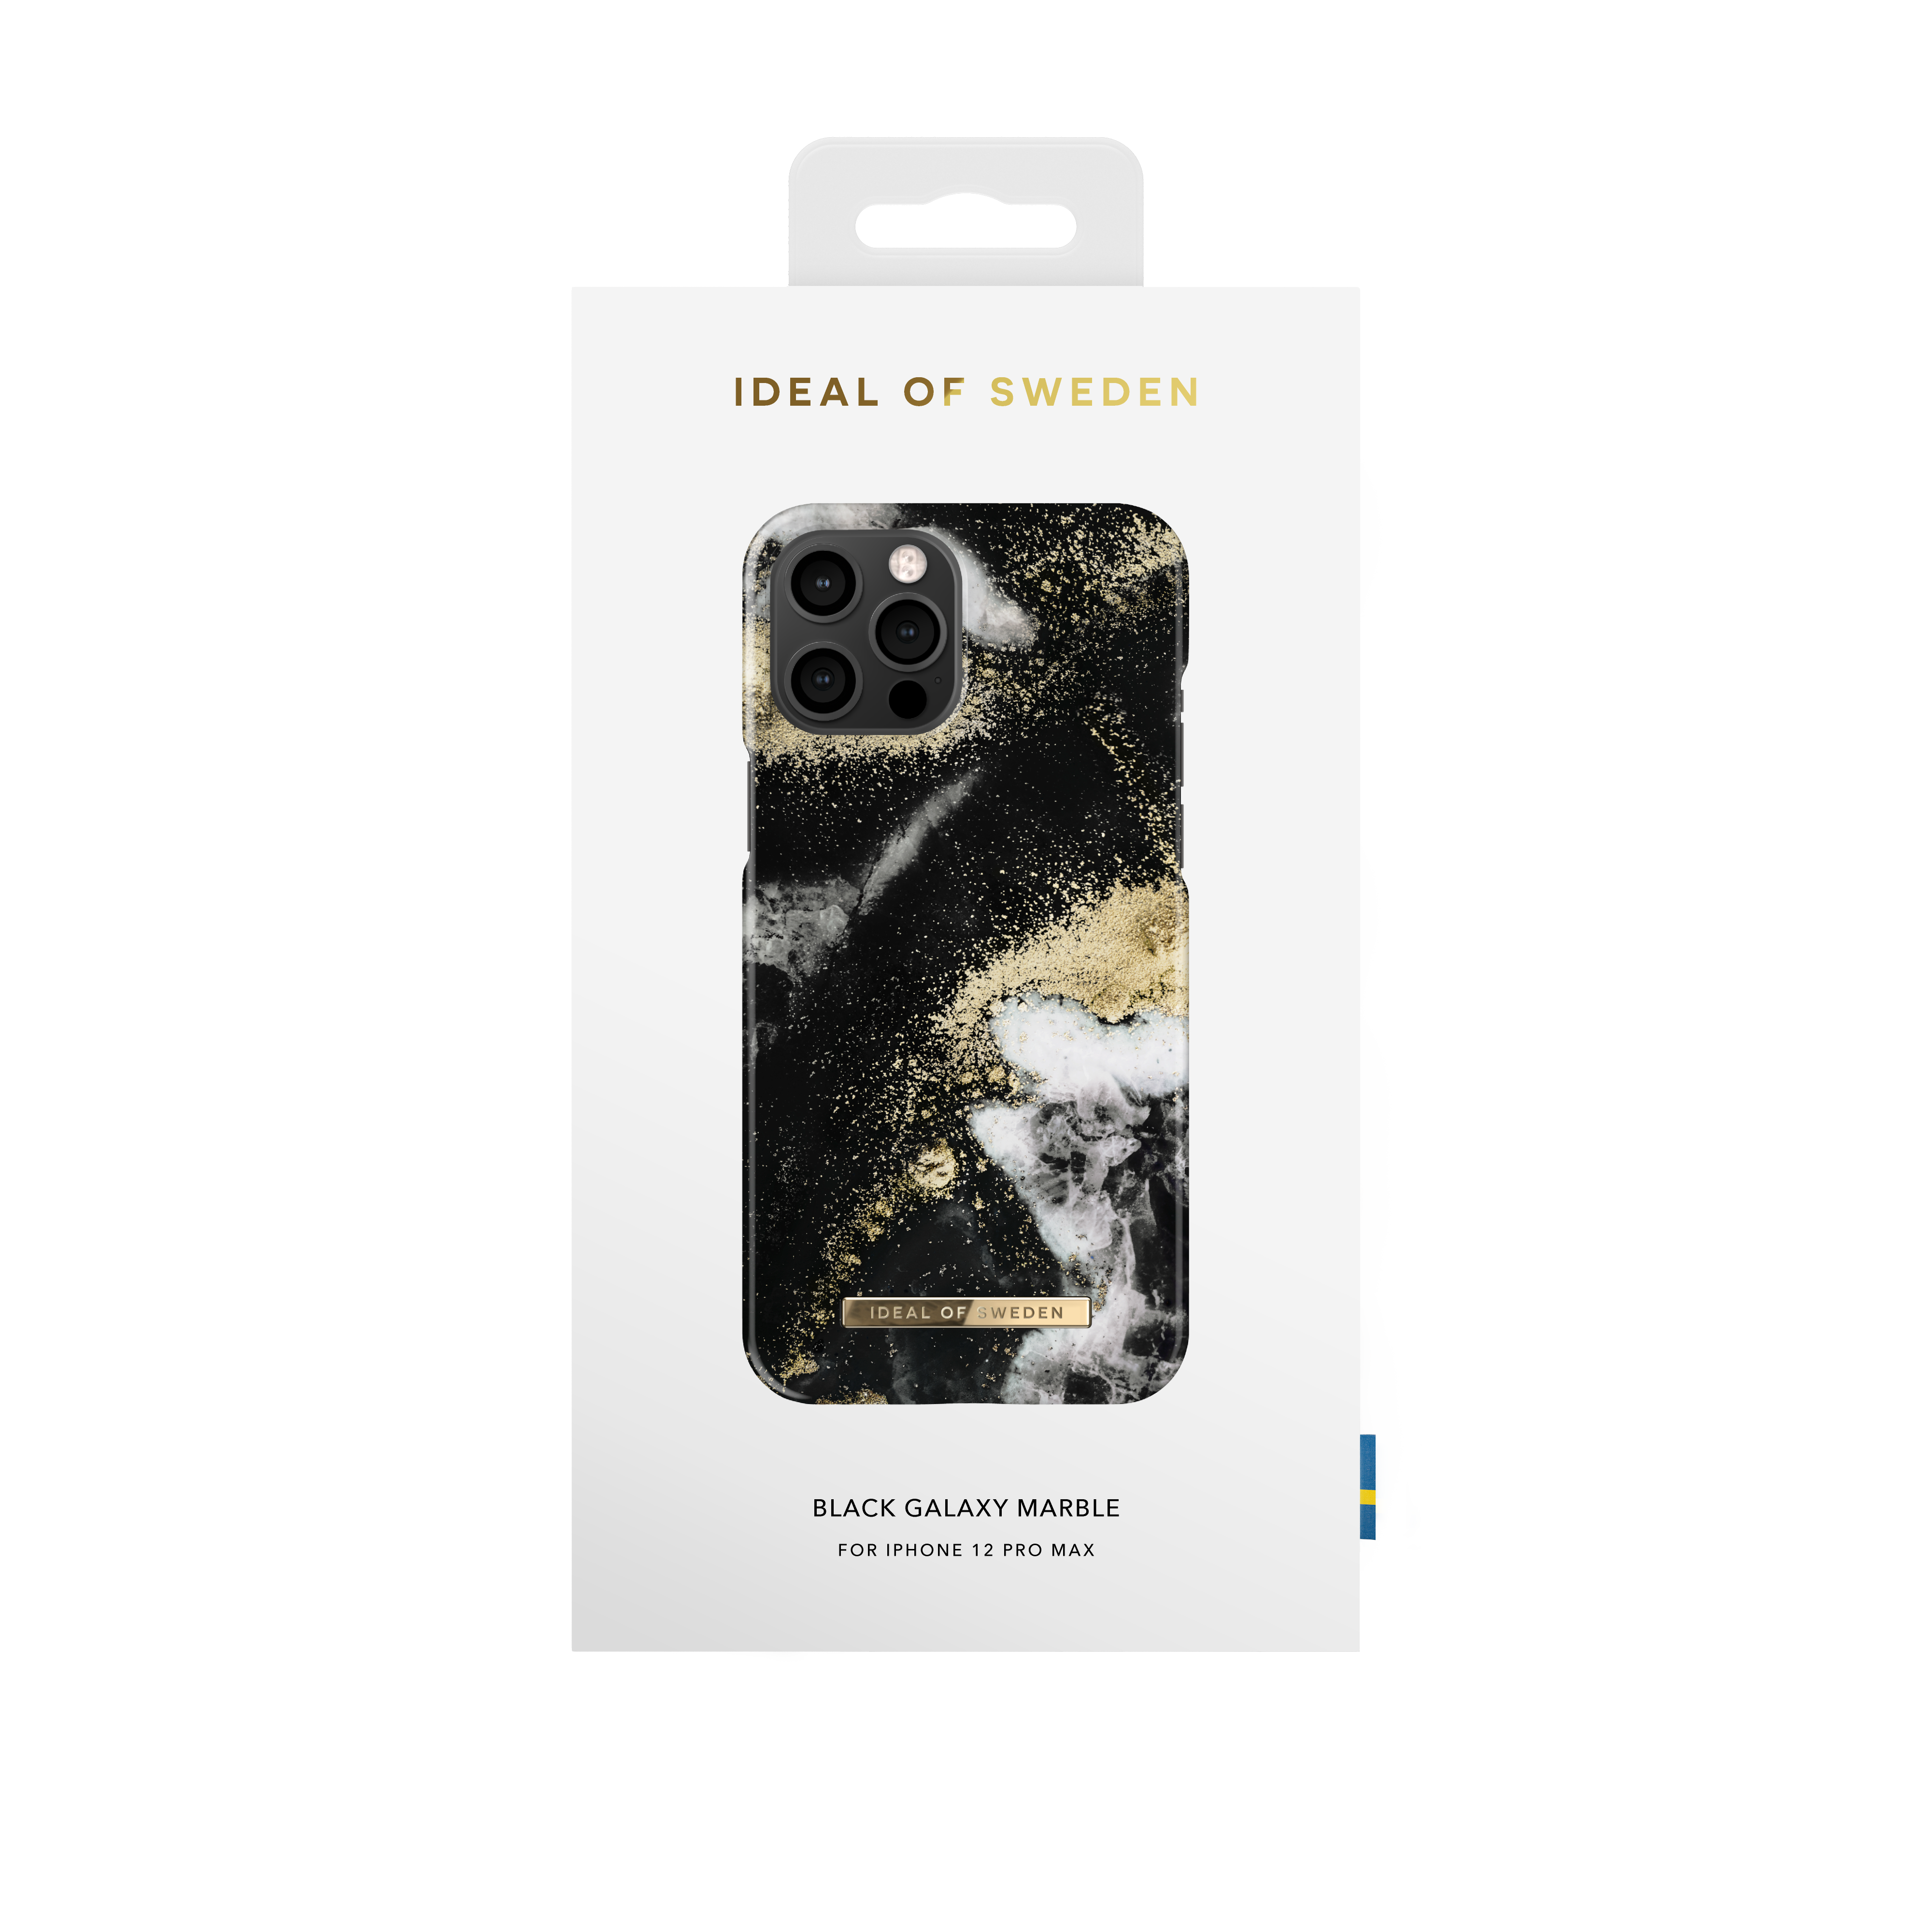 Backcover, SWEDEN OF Apple, Marble IPhone Black Galaxy Pro Max, IDFCAW19-I2067-150, 12 IDEAL